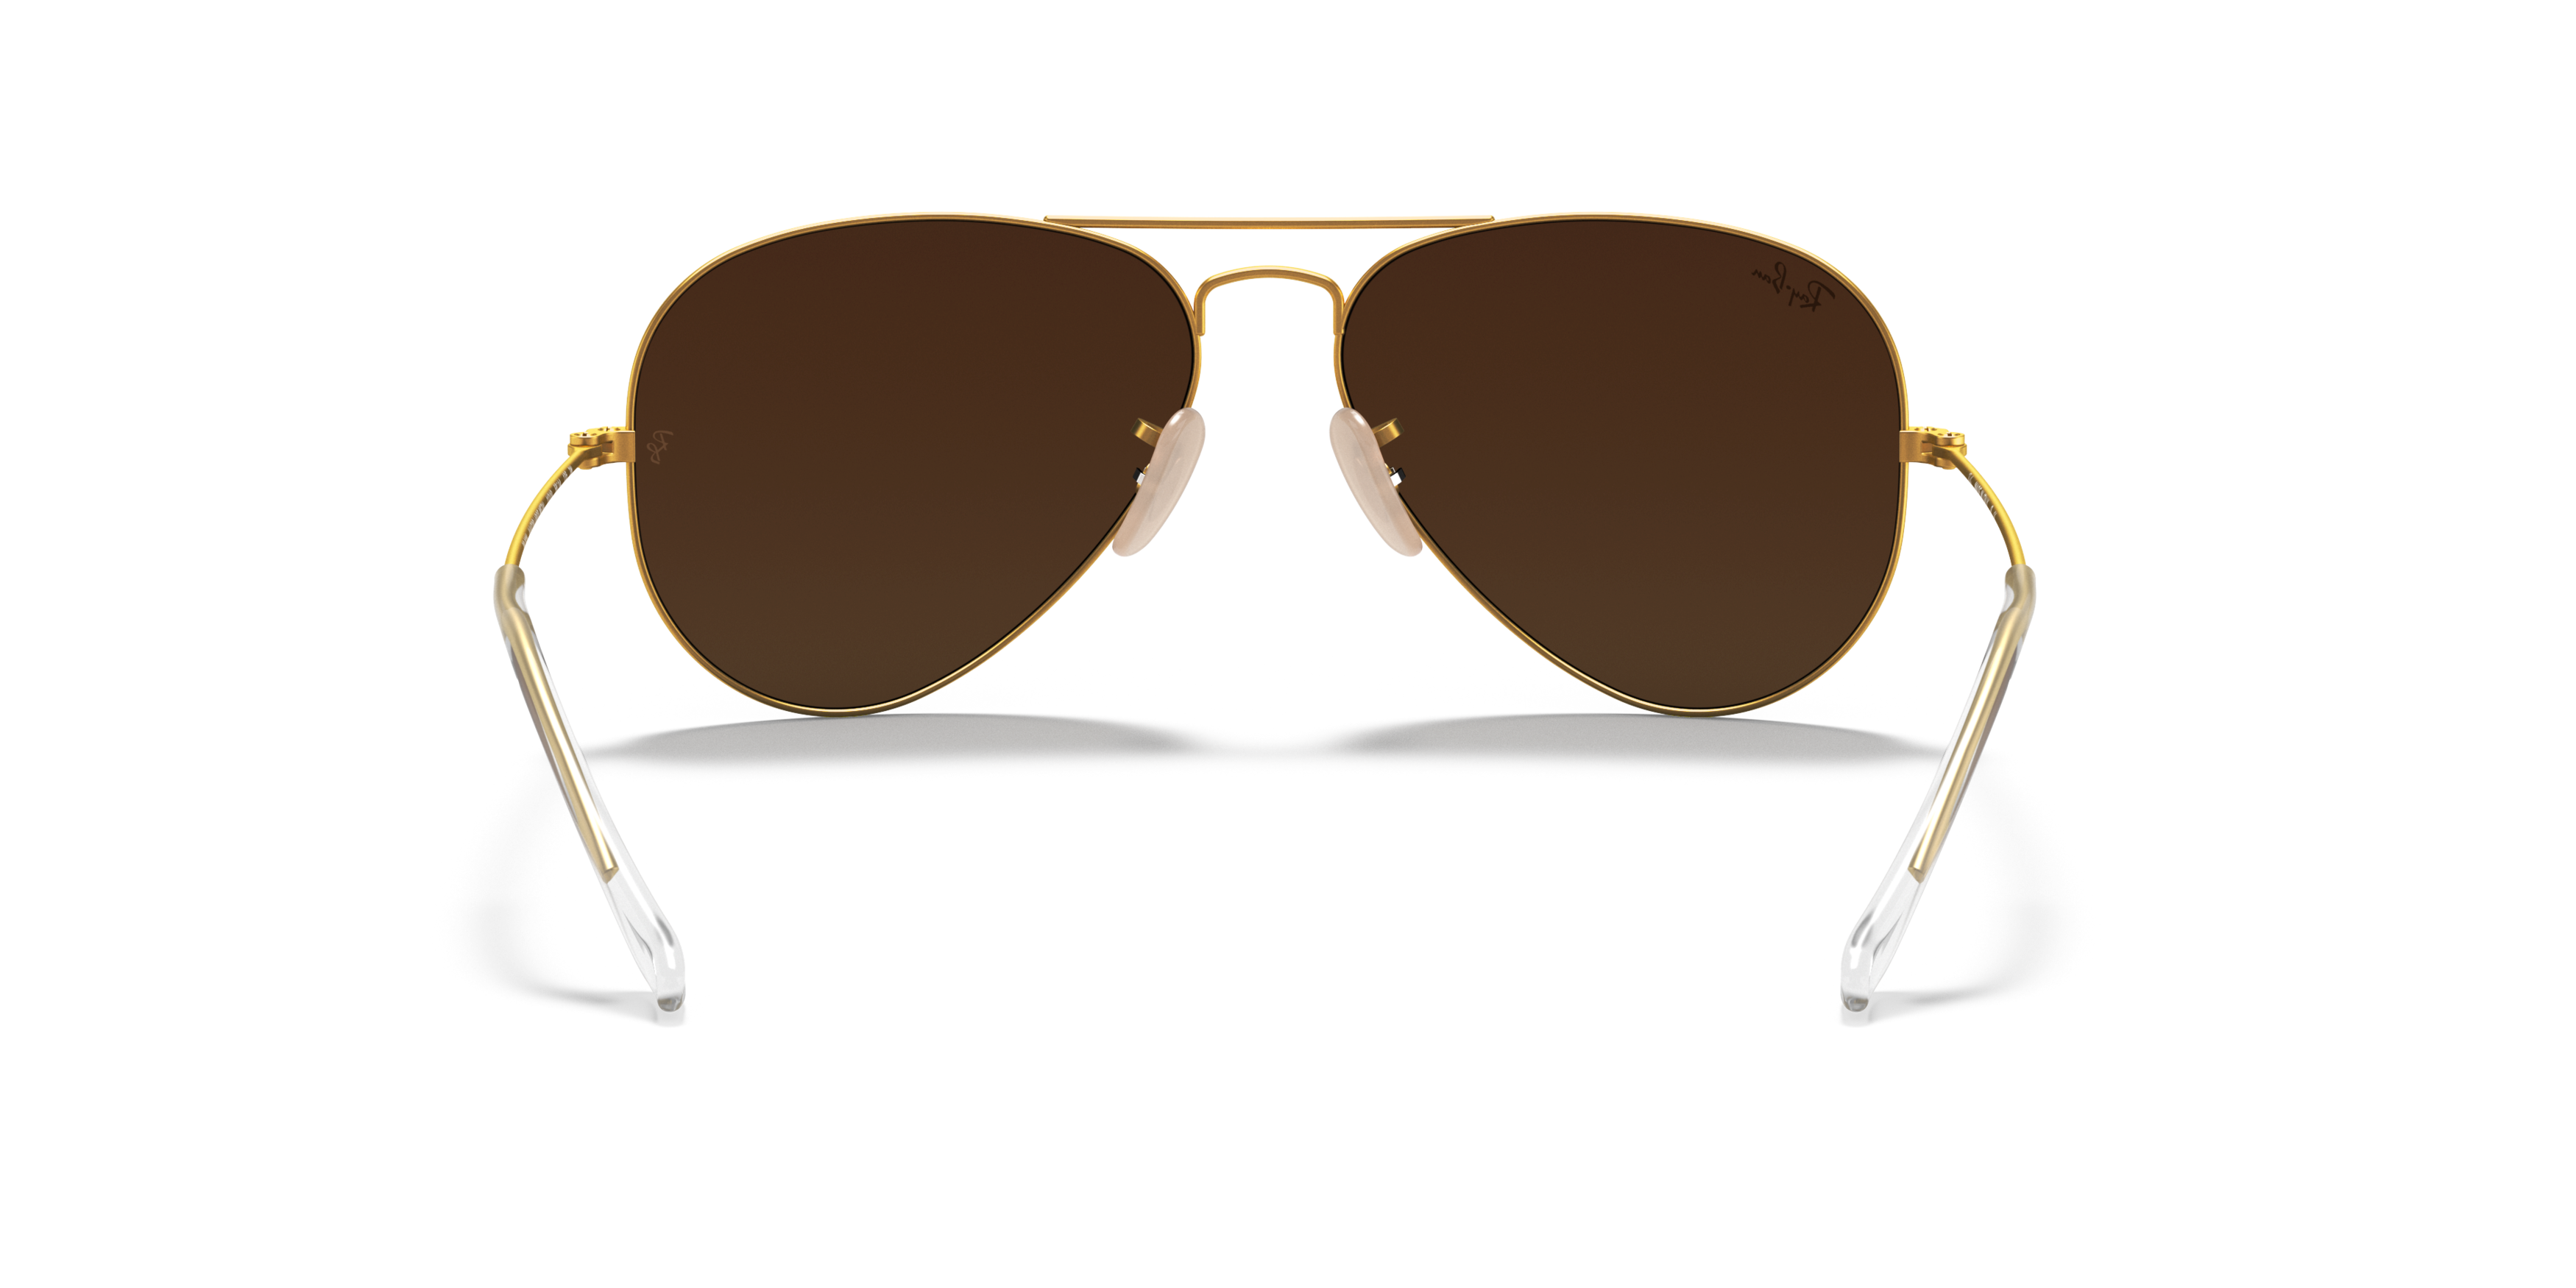 [products.image.detail02] Ray-Ban Aviator Flash Lenses RB3025 112/19